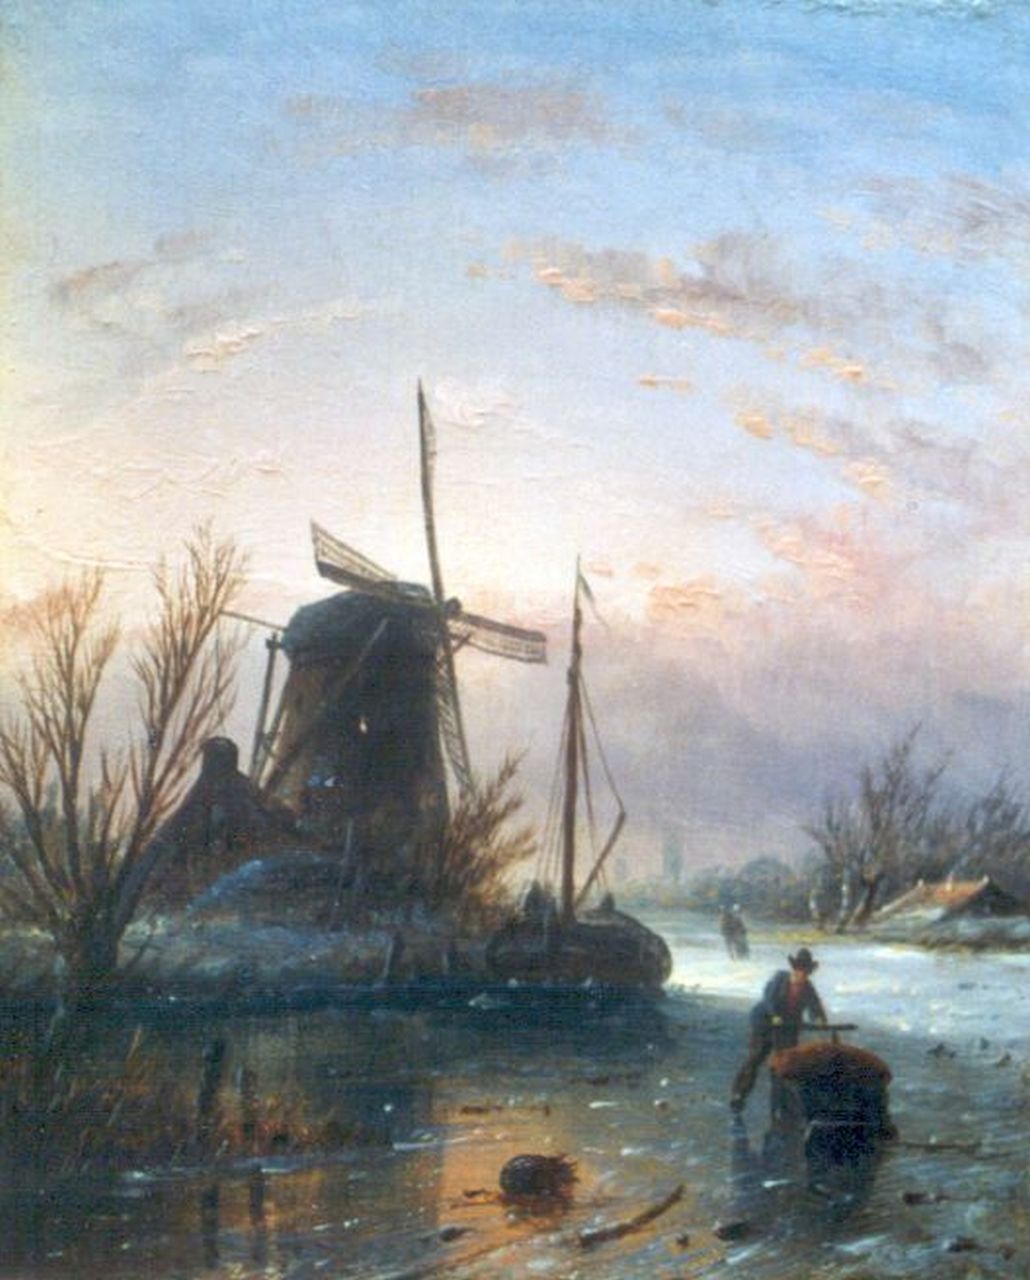 Spohler J.J.C.  | Jacob Jan Coenraad Spohler, Skaters on a frozen waterway, oil on panel 13.9 x 11.2 cm, signed l.l. with initials